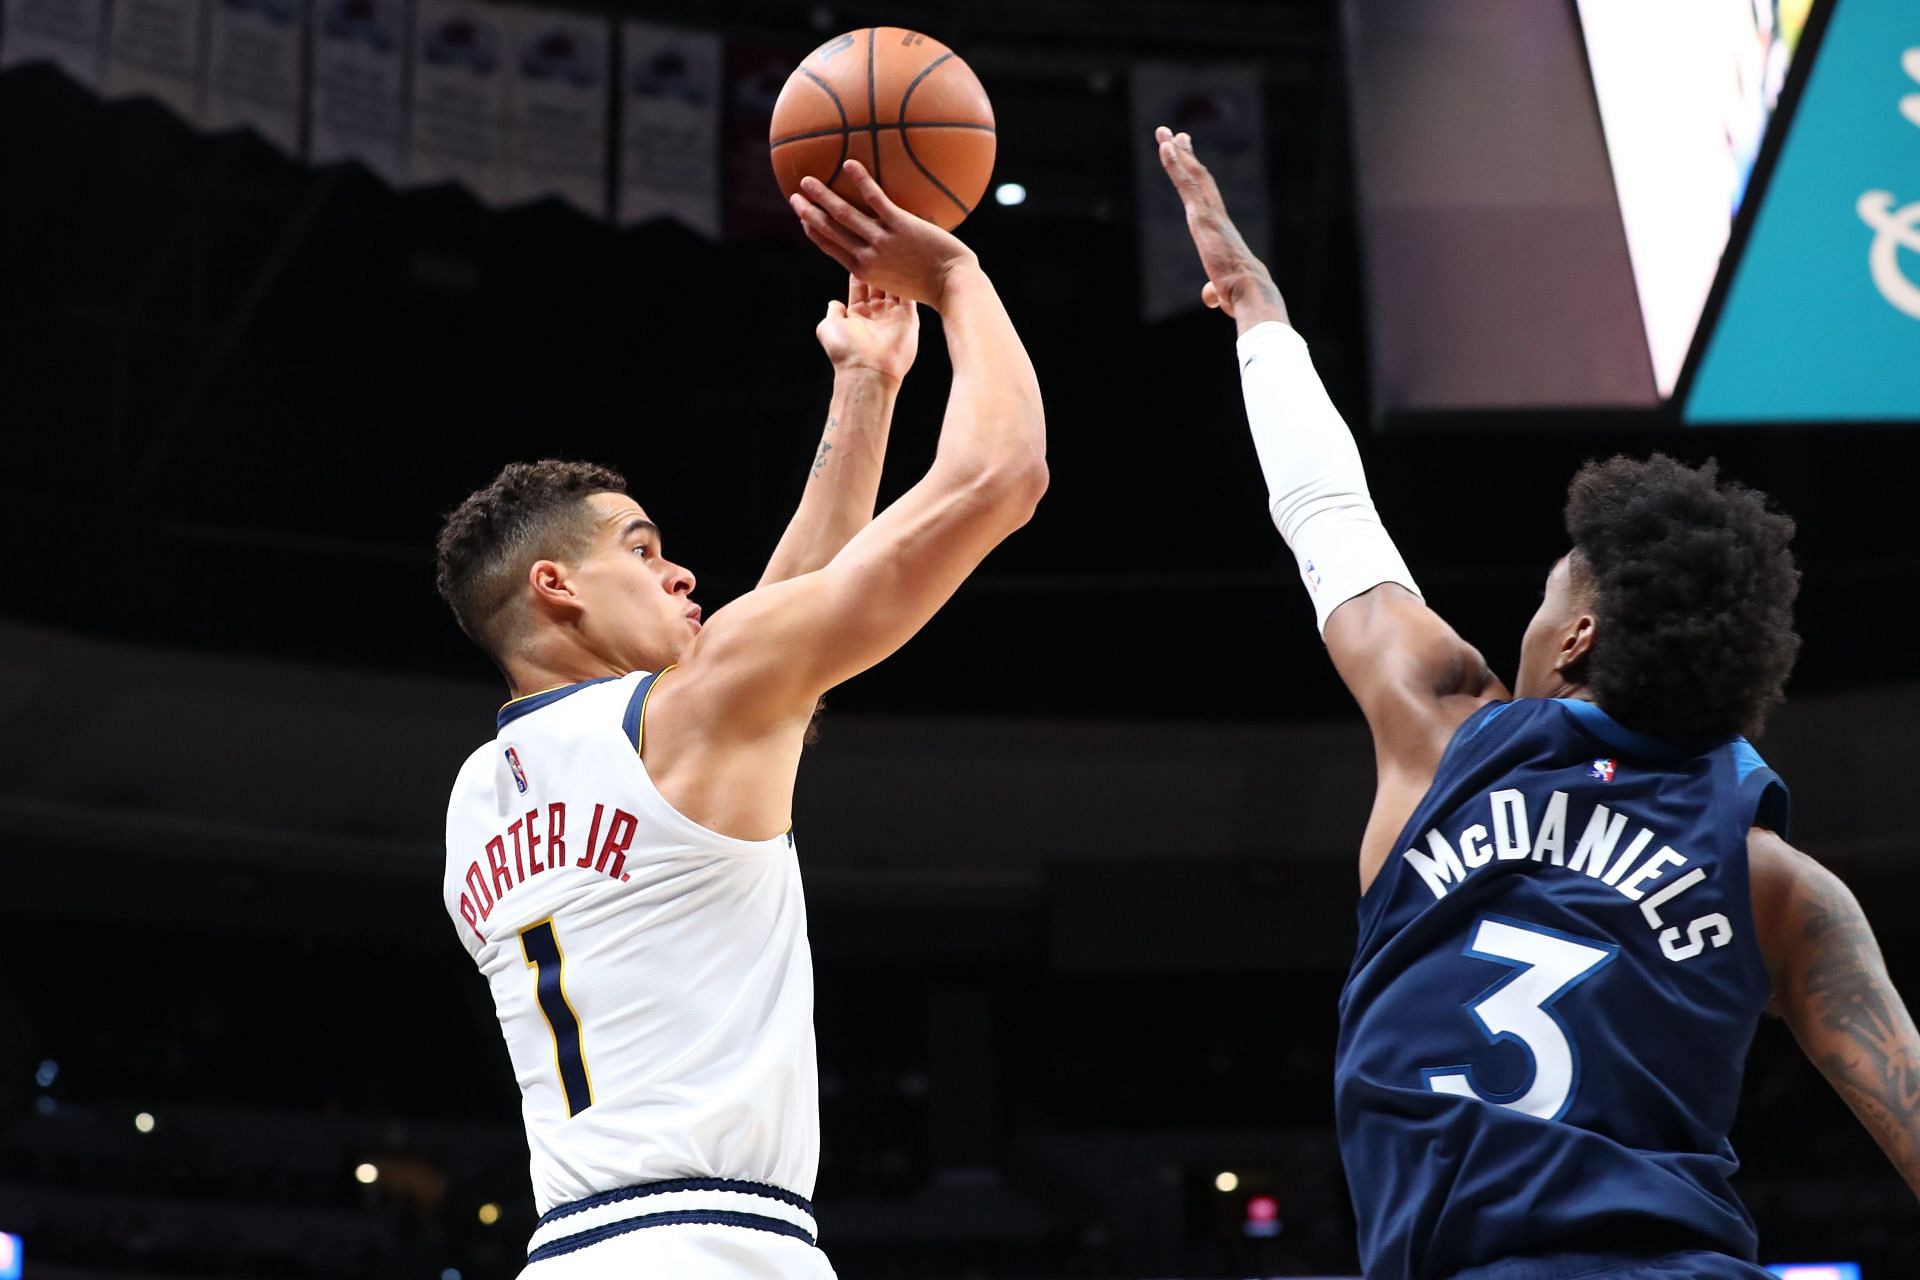 Michael Porter Jr. #1 of the Denver Nuggets shoots a three point shot against Jaden McDaniels #3 of the Minnesota Timberwolves during the third quarter at Ball Arena on October 8, 2021 in Denver, Colorado.